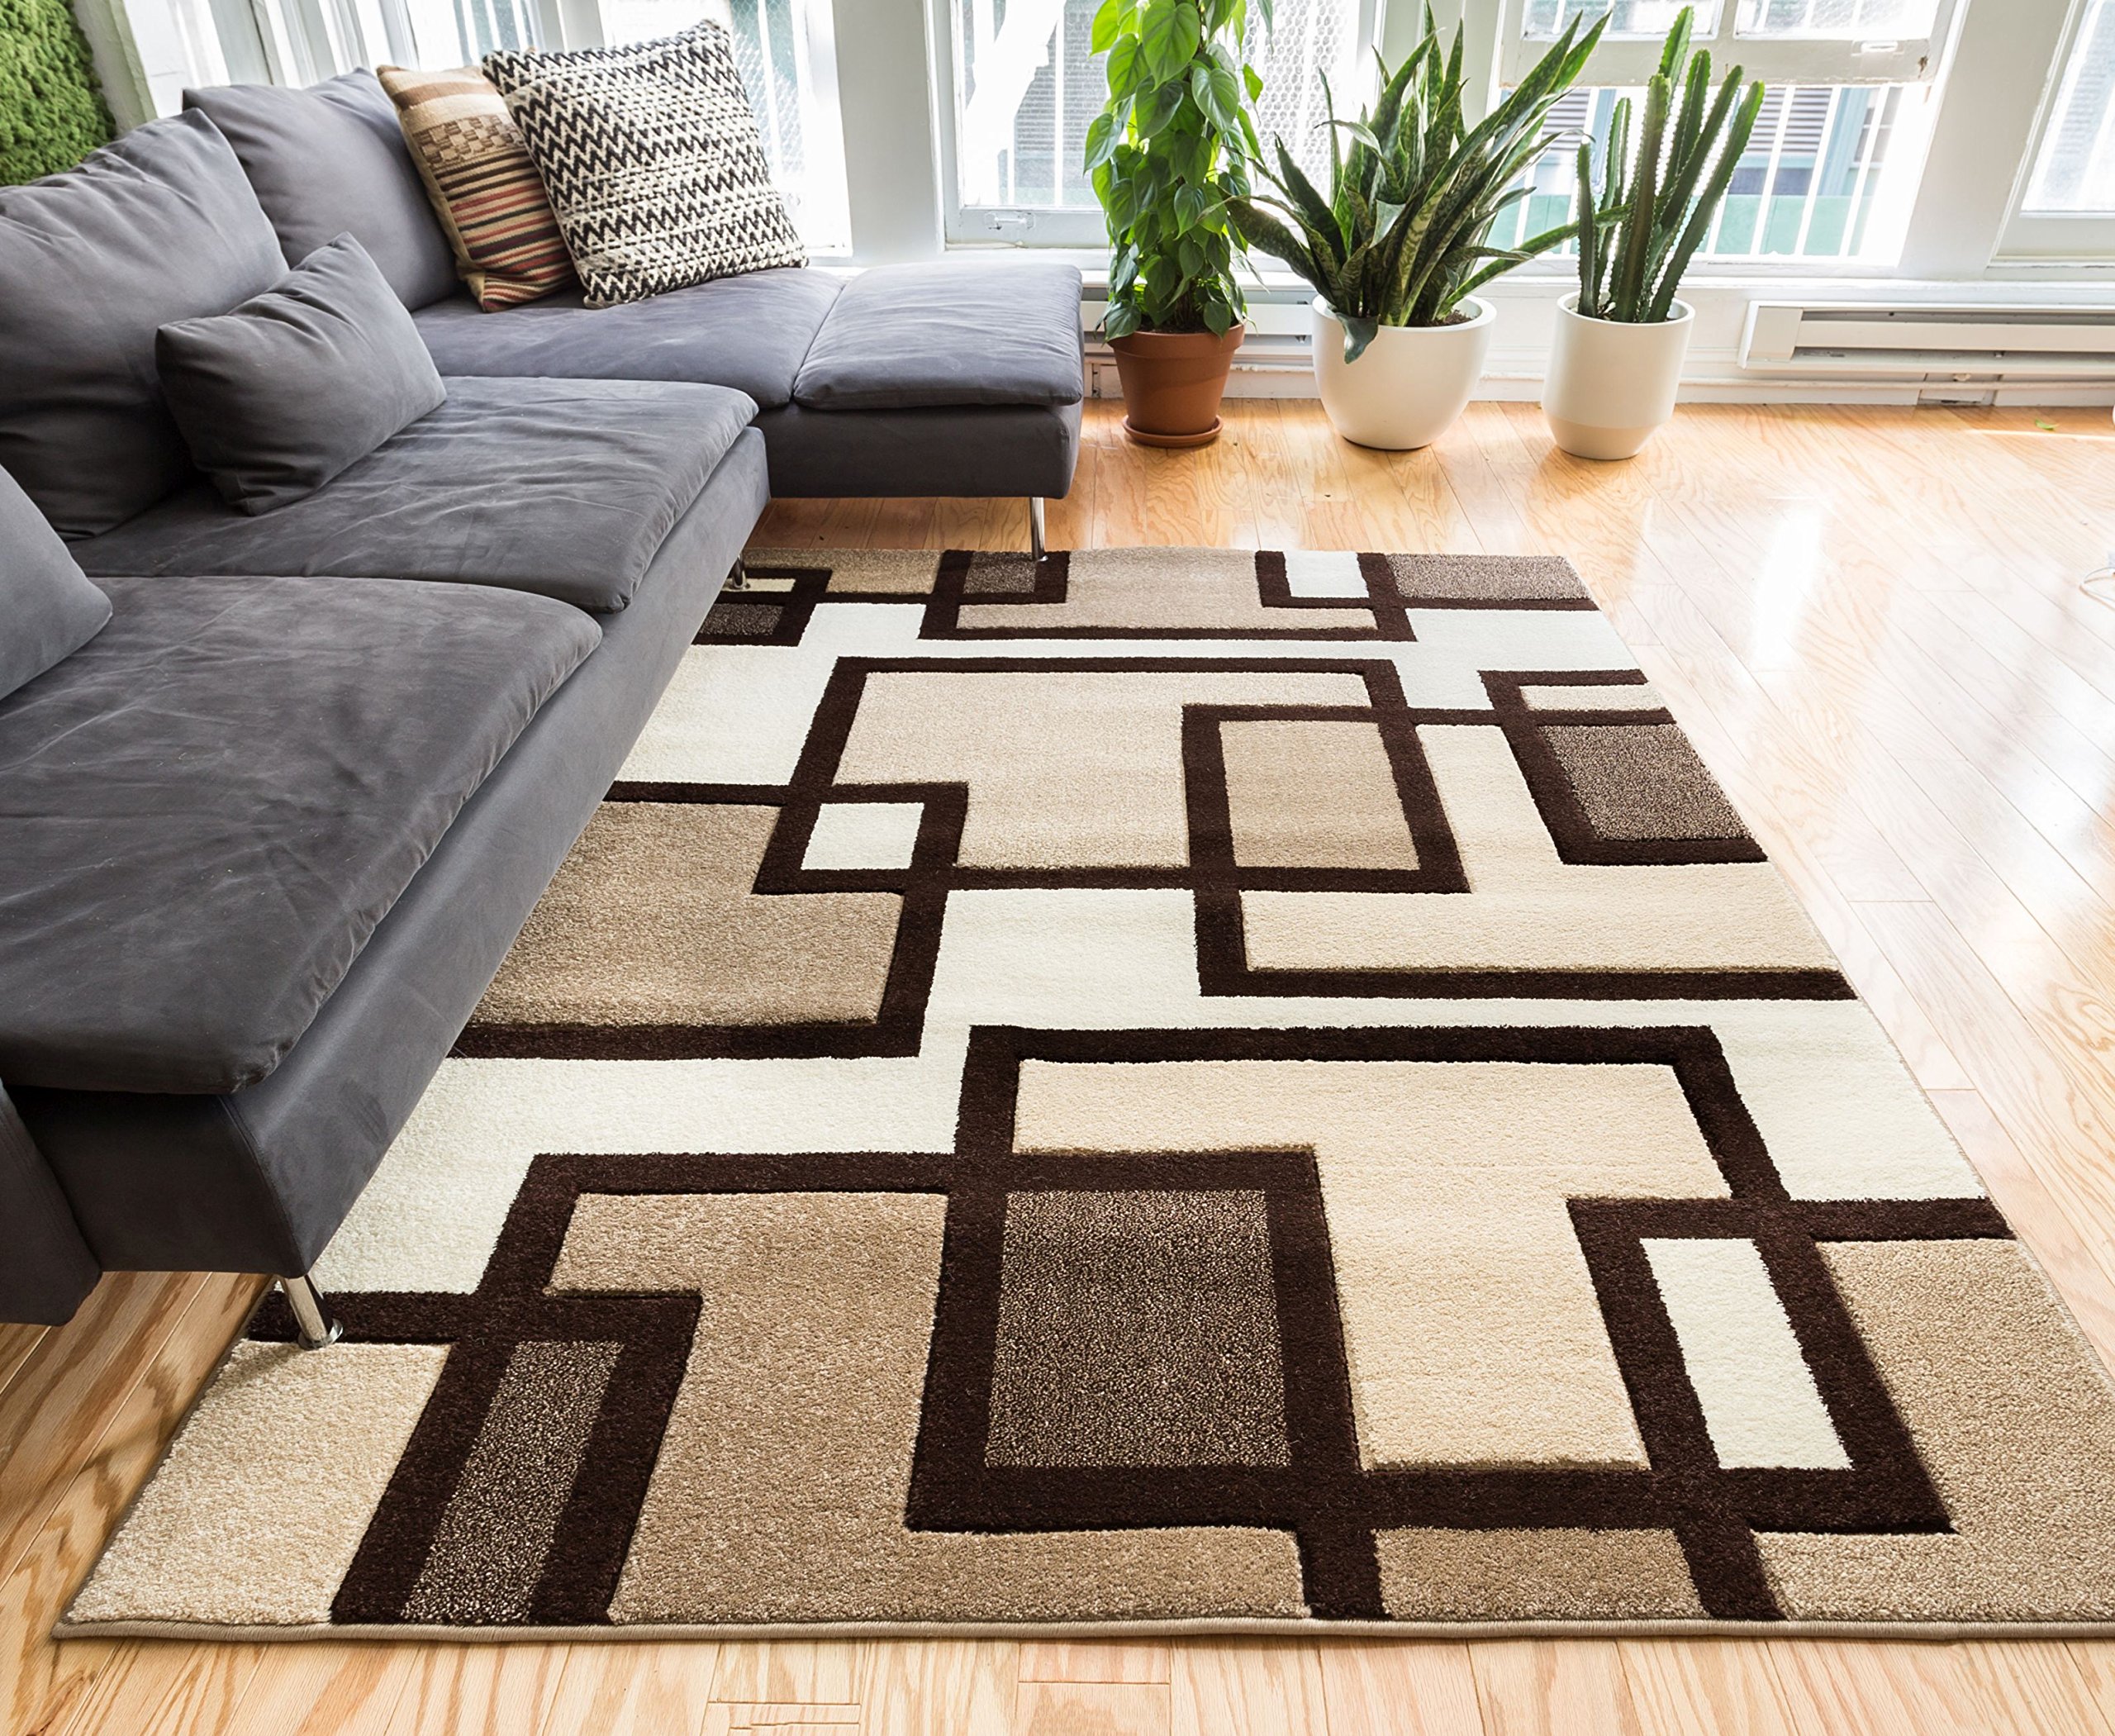 Cheap Area Rugs For Dining Room